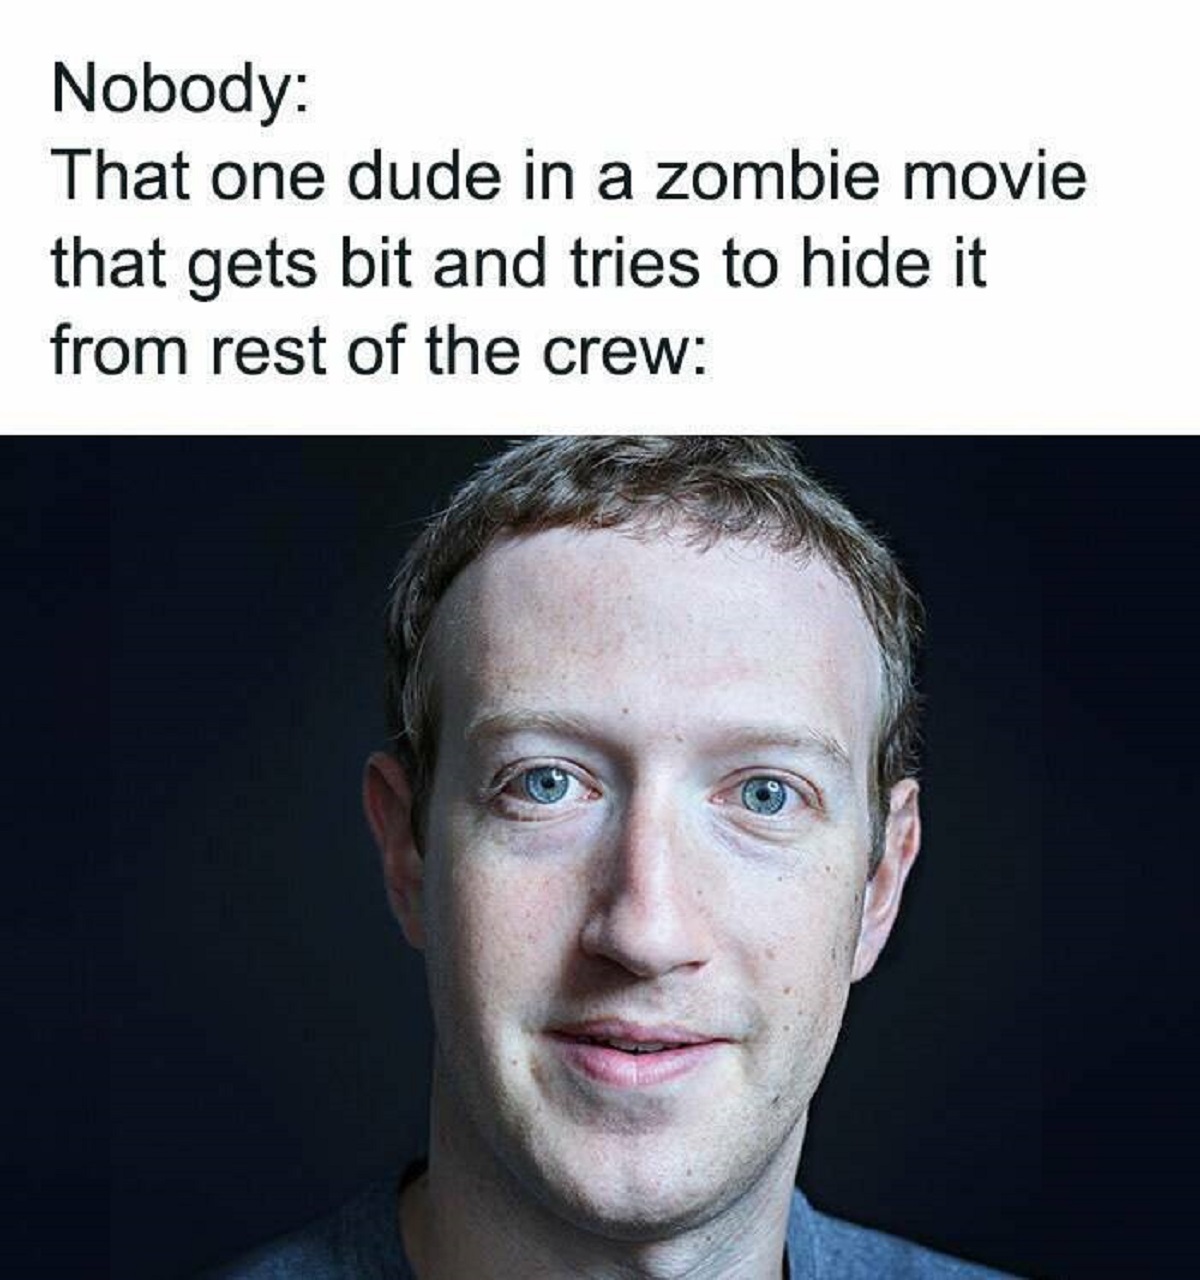 mark zuckerberg forbes - Nobody That one dude in a zombie movie that gets bit and tries to hide it from rest of the crew